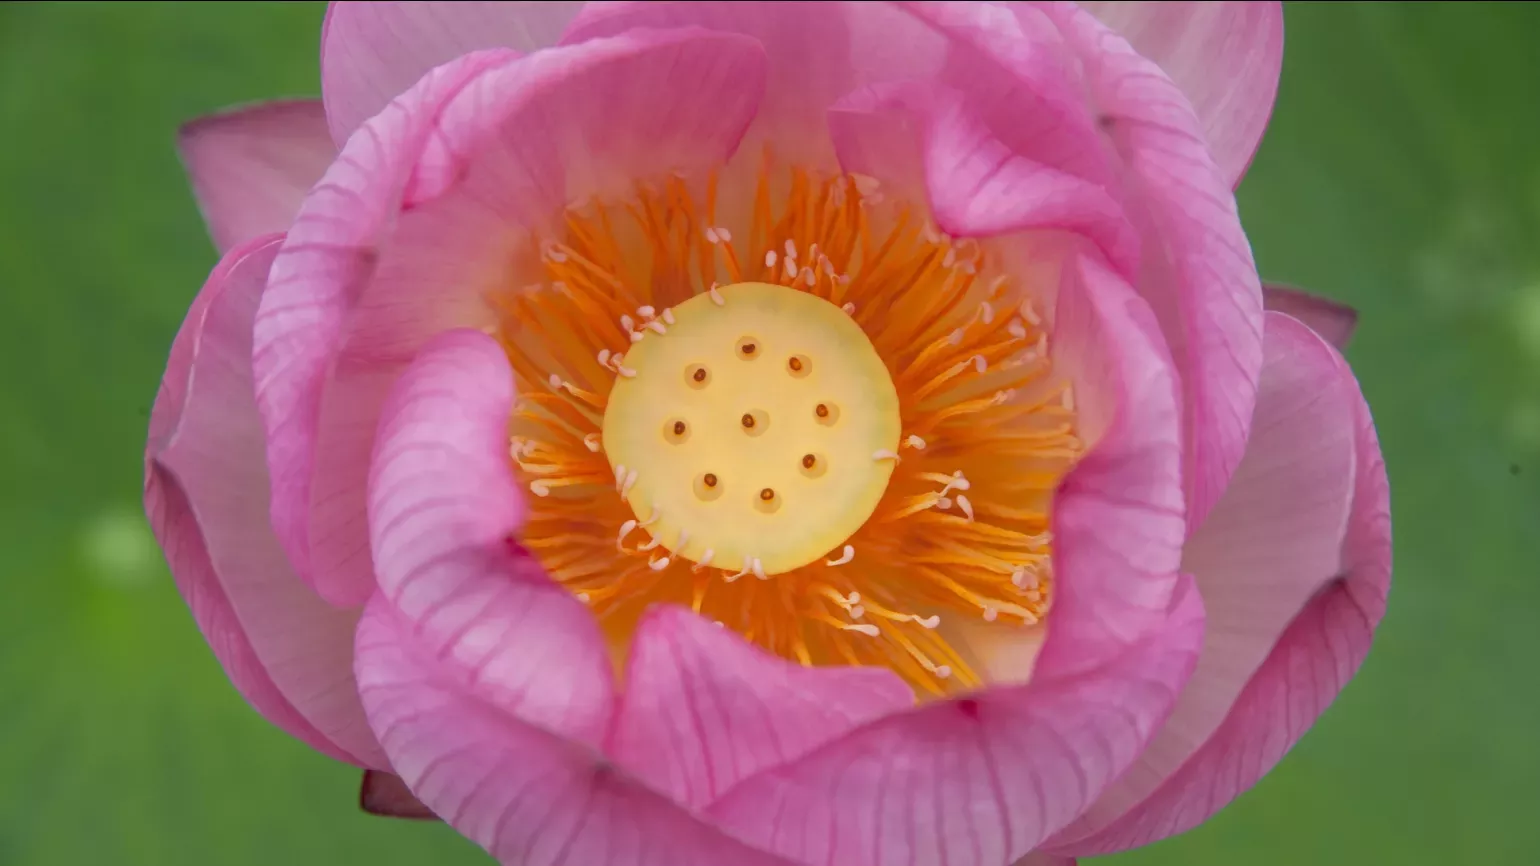 A pink sacred lotus flower with a bright yellow centre containing young seeds